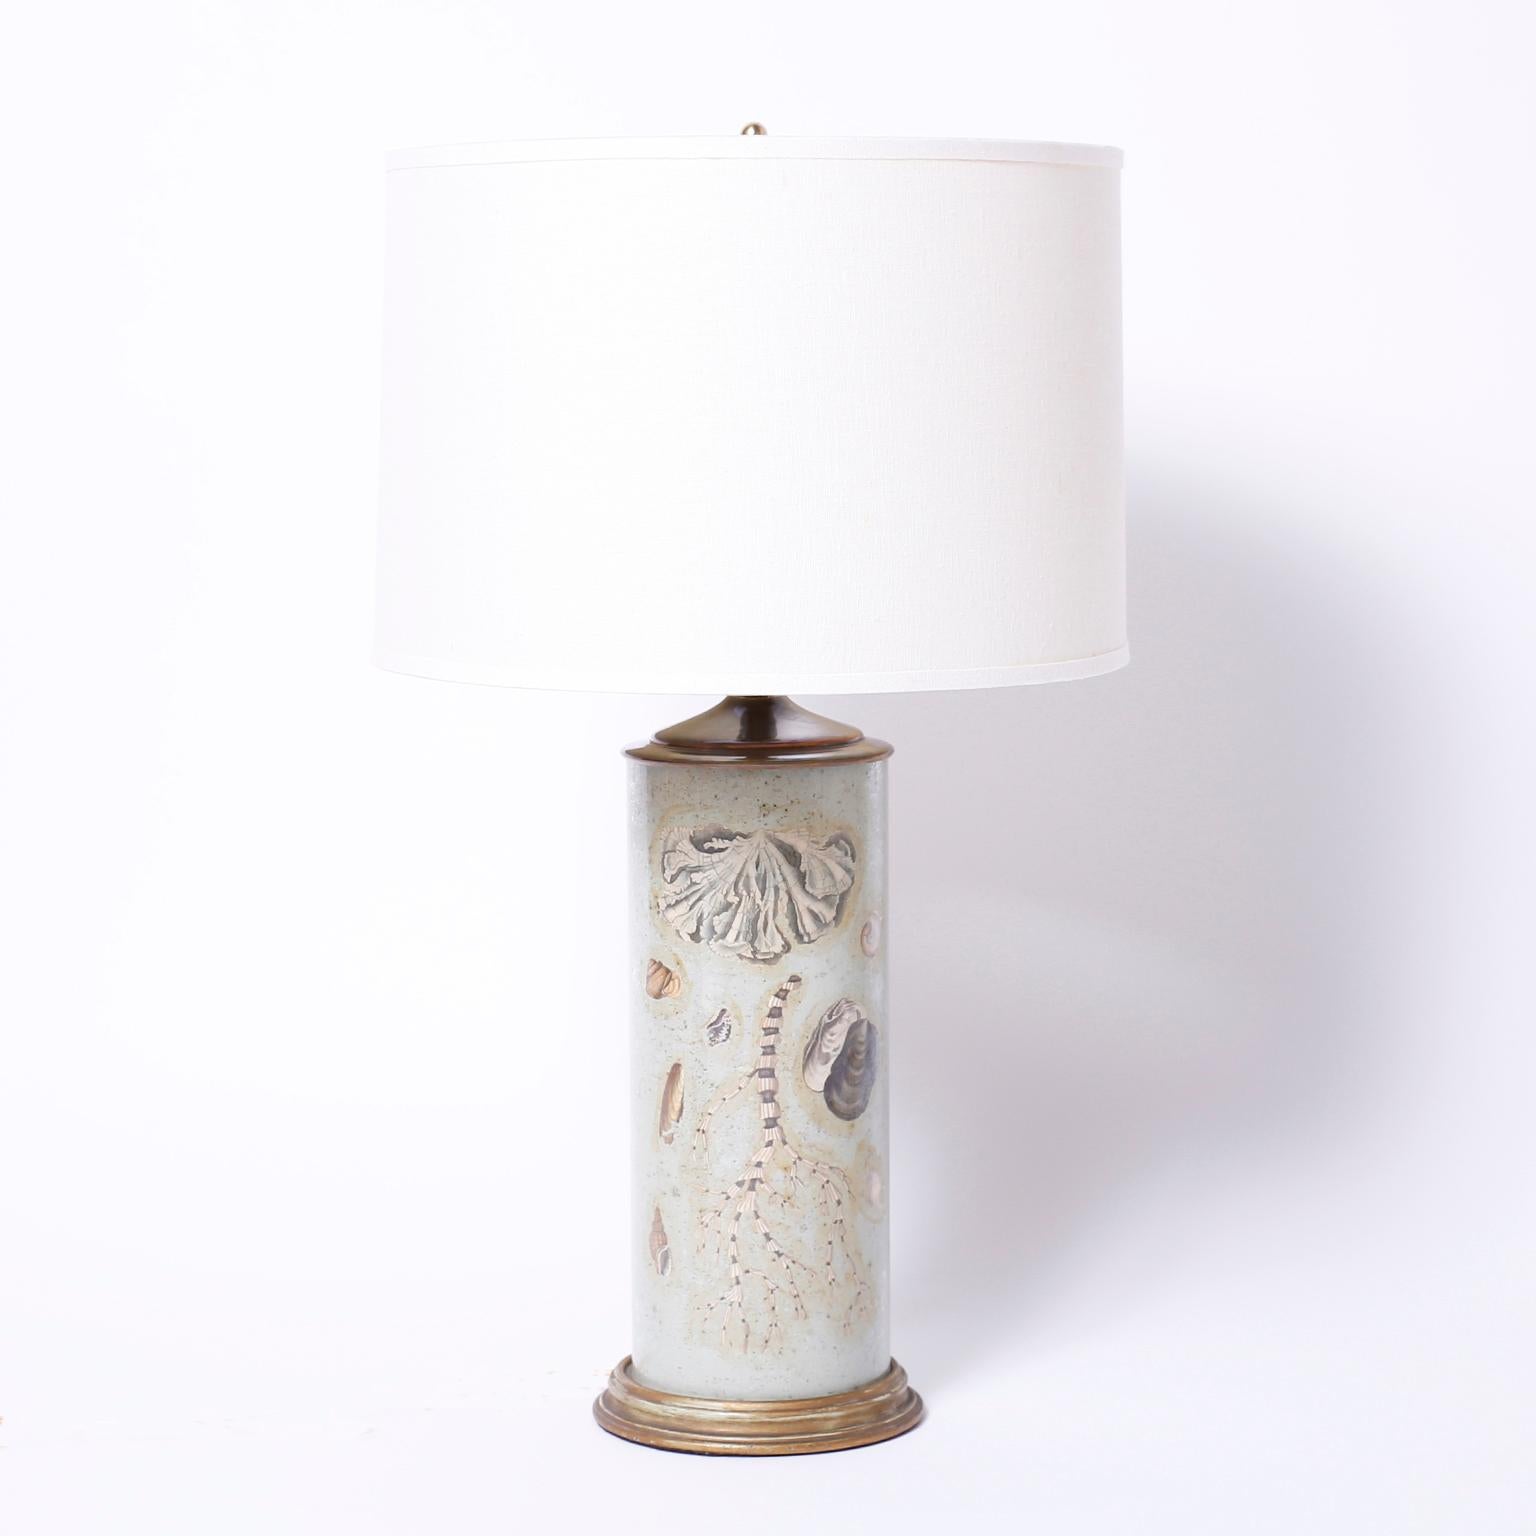 Unique pair of glass cylinder table lamps with marine shell and sea life inspired reverse elgomise decoupage against a sea green background.